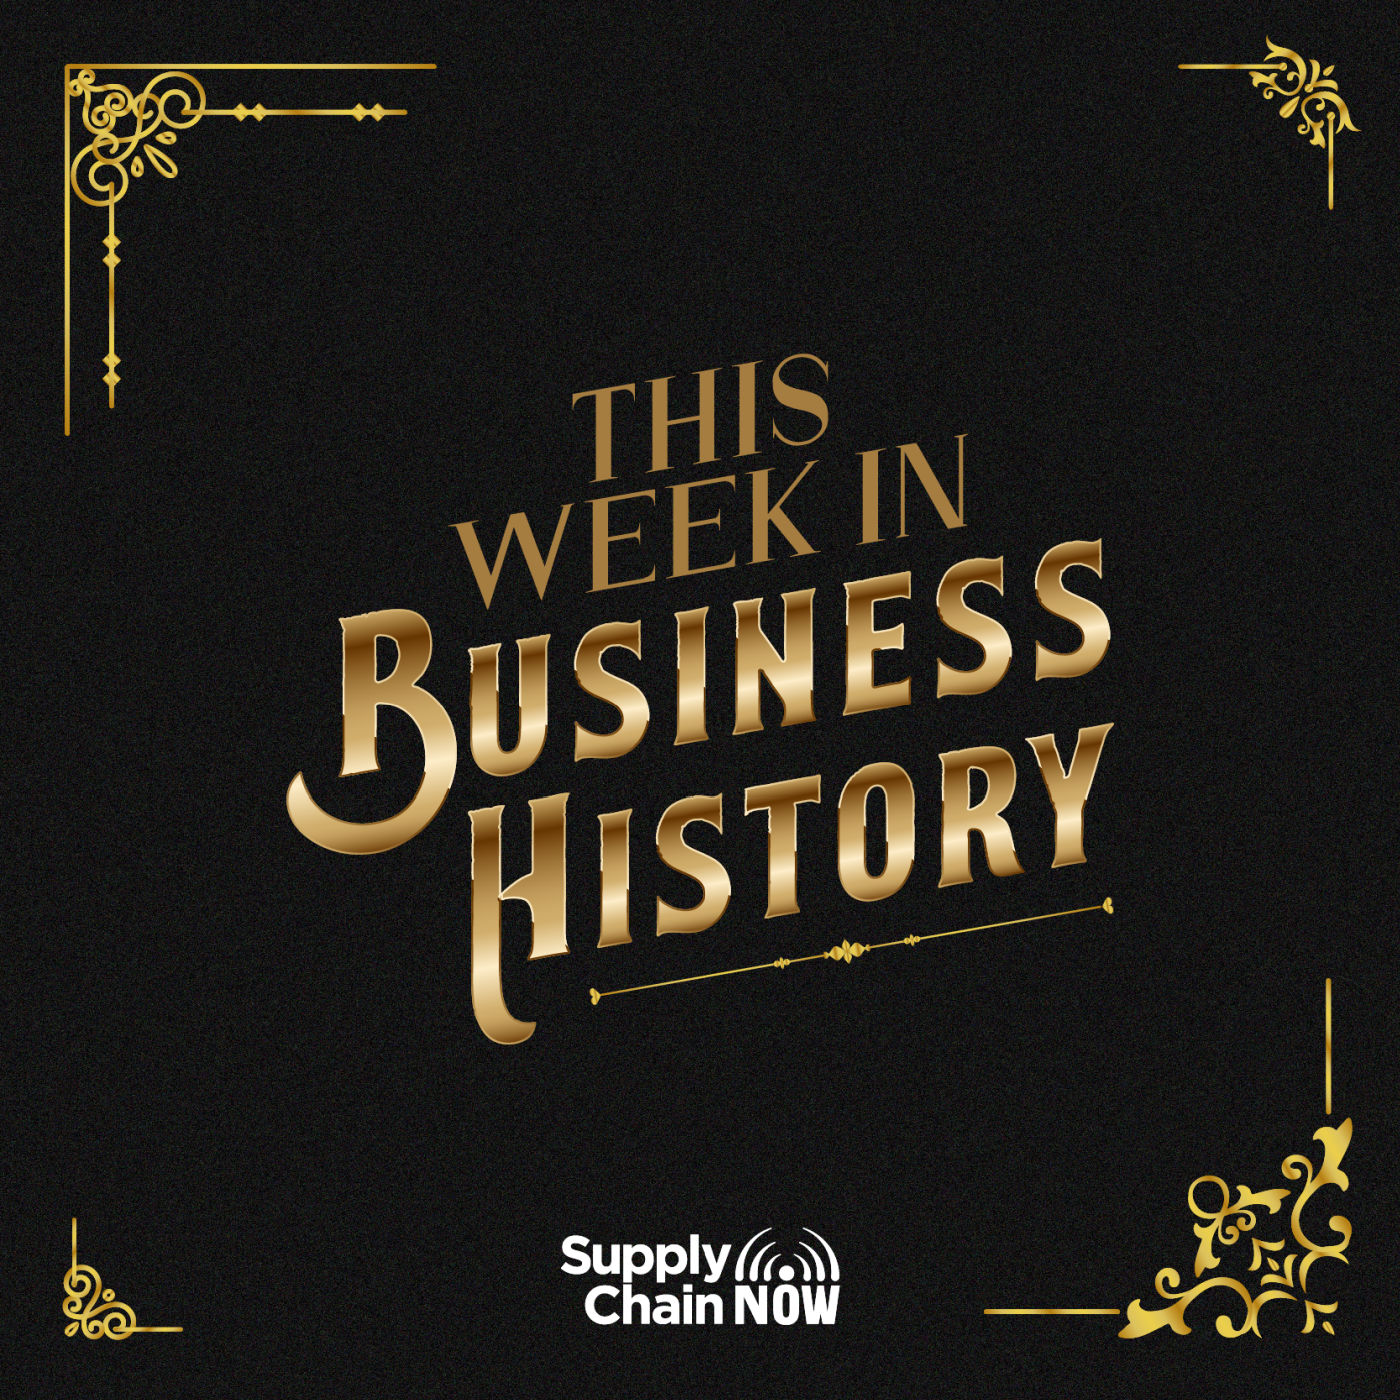 Artwork for This Week in Business History